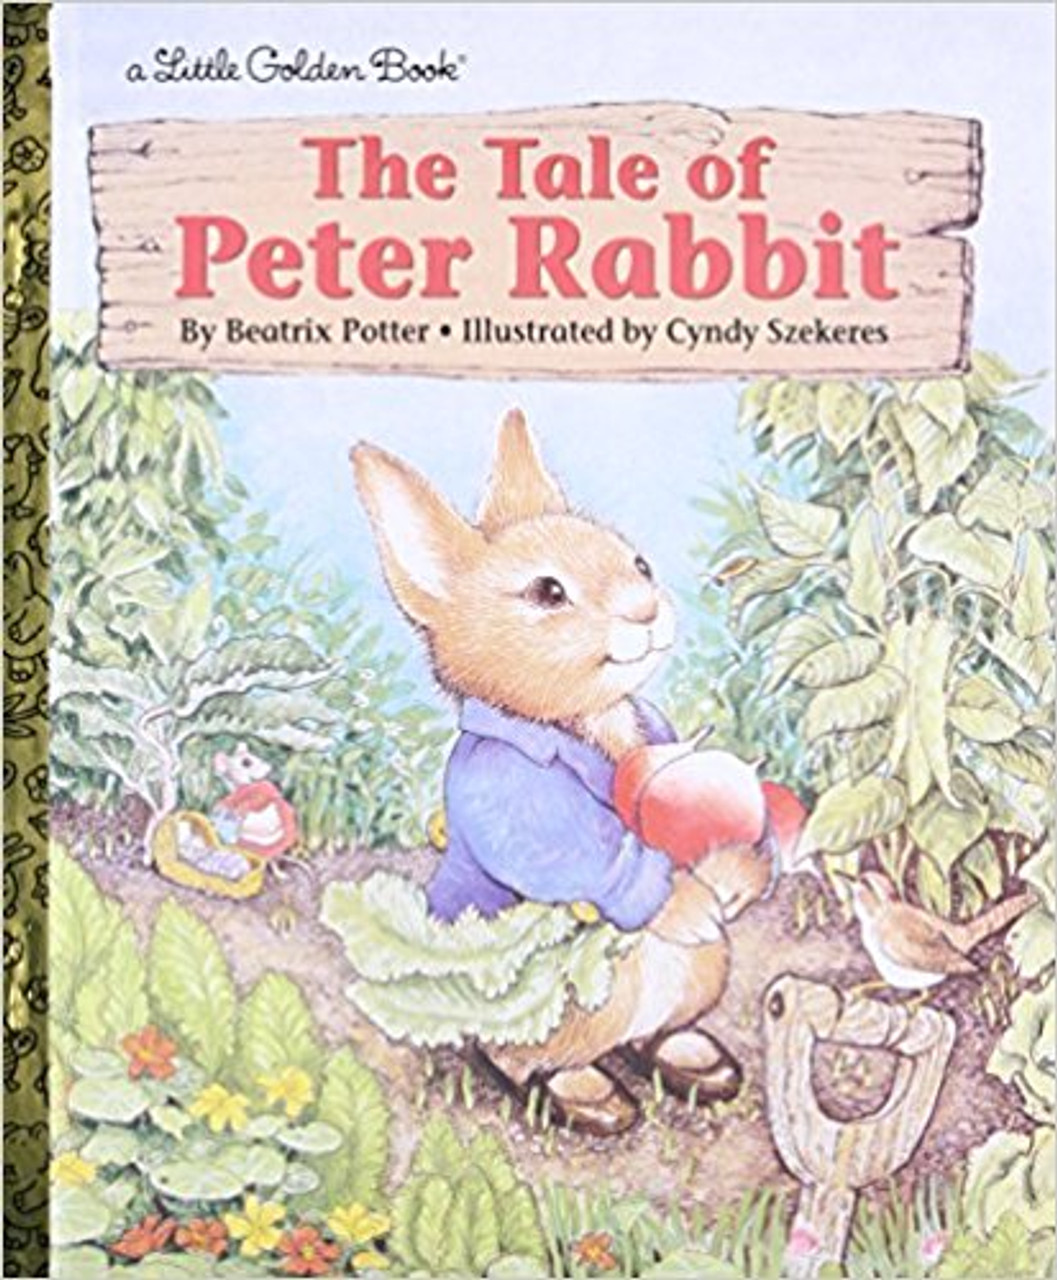 Tale of Peter Rabbit, The by Beatrix Potter